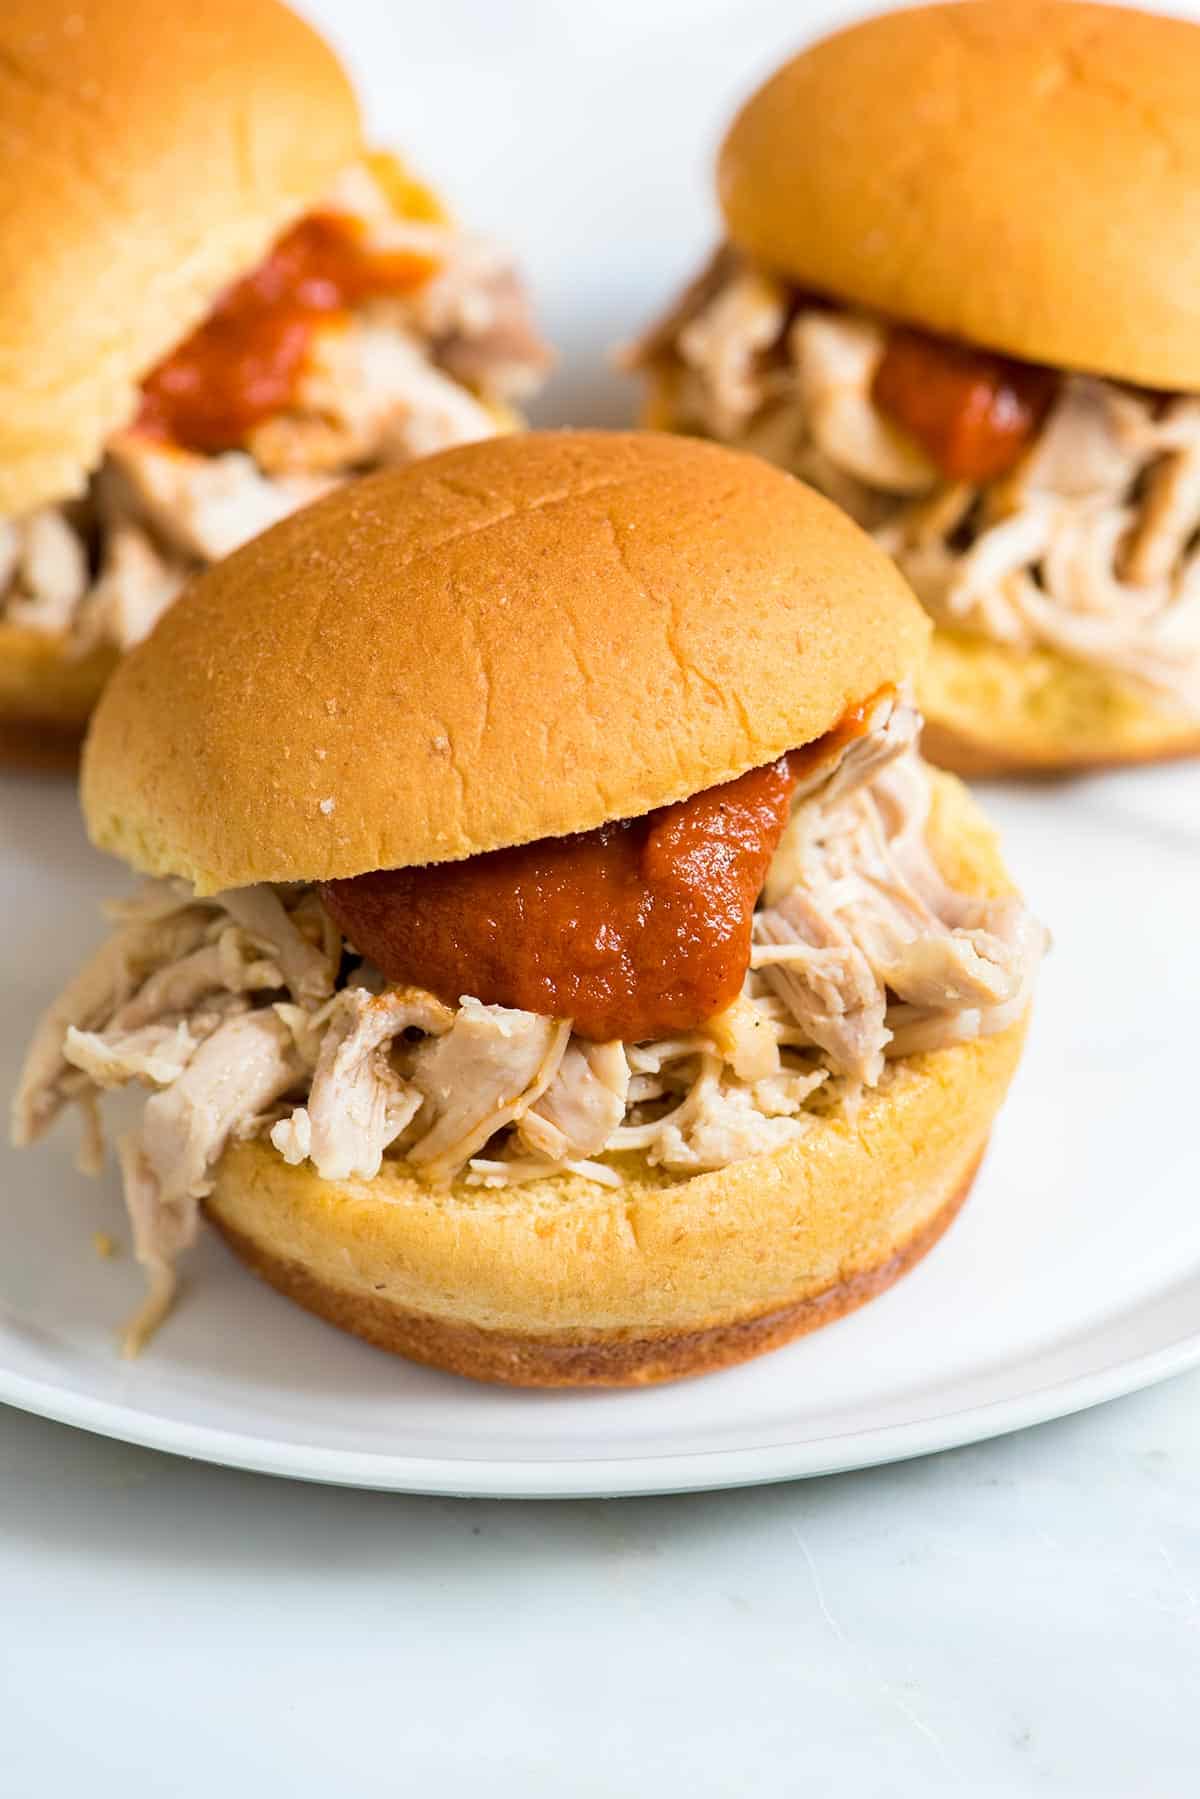 How to make tender and flavorful shredded chicken using a slow cooker. Try this easy recipe and use for sandwiches, tacos and more.